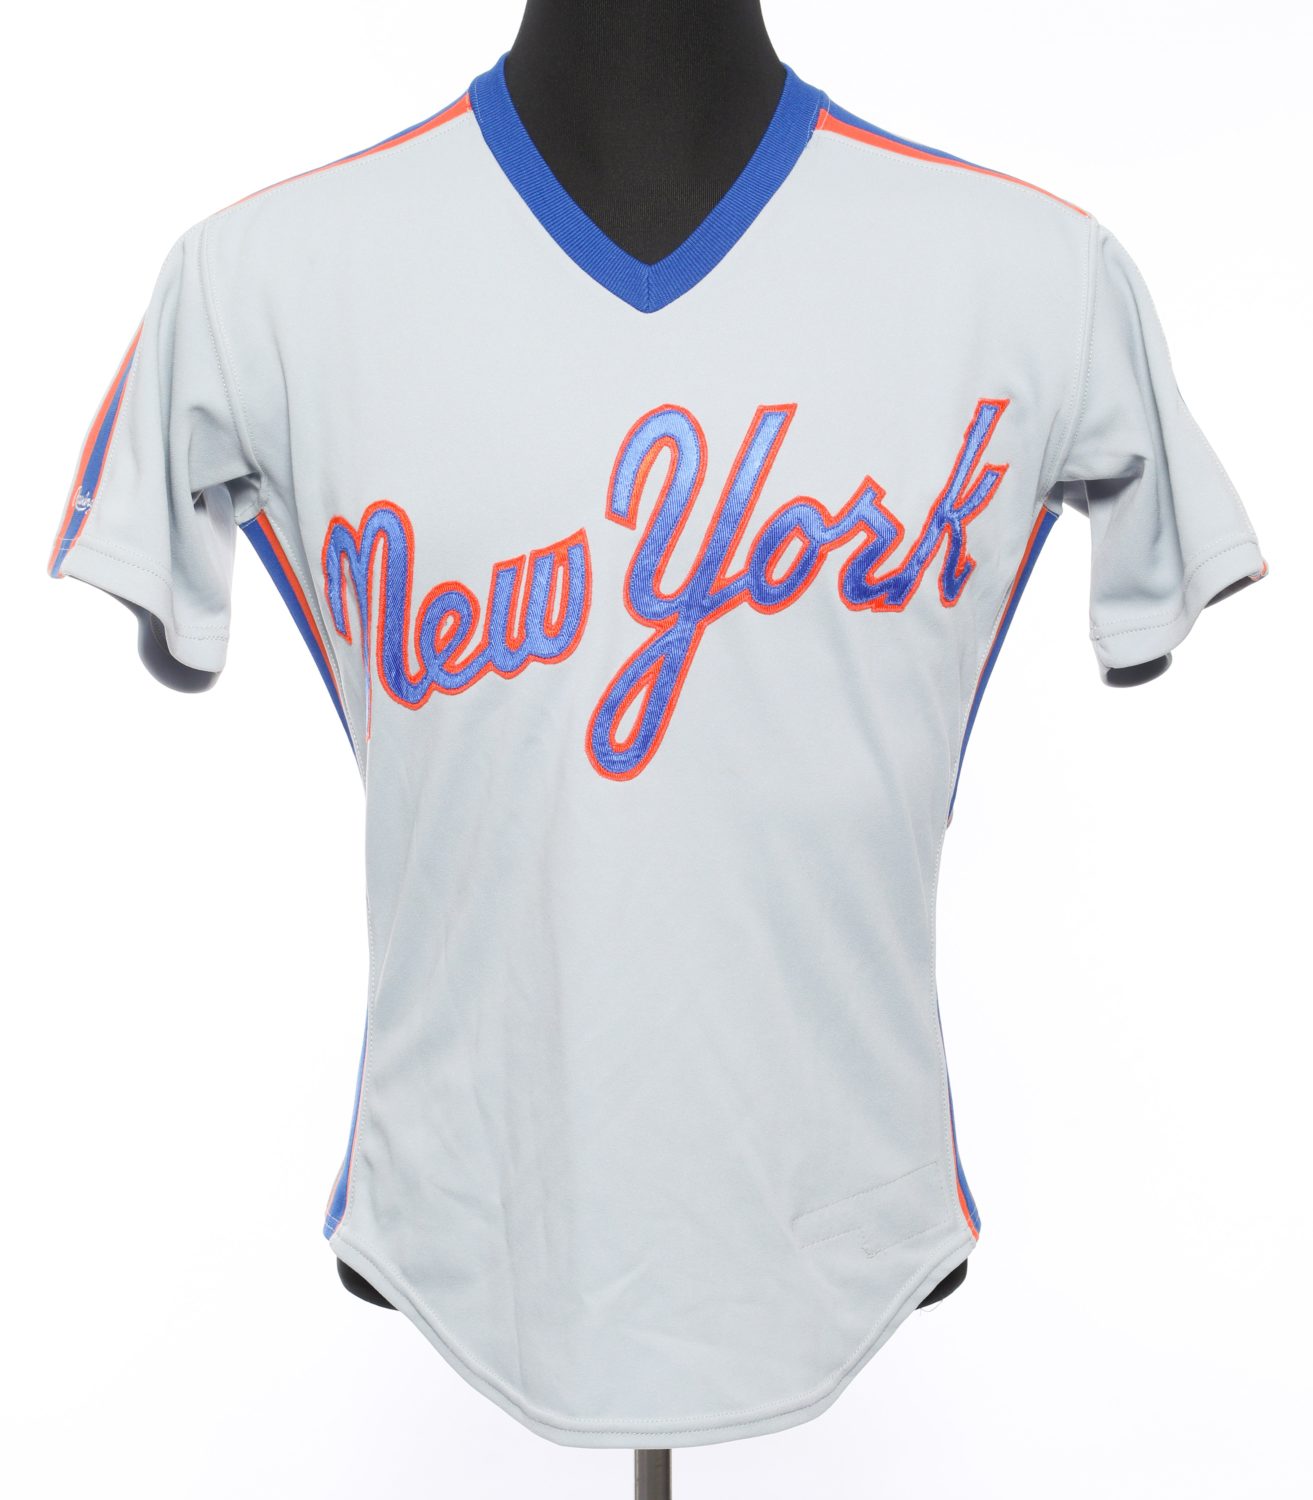 PHOTOS: the Tribute to Gary Carter Included Mets Players Wearing His Jersey